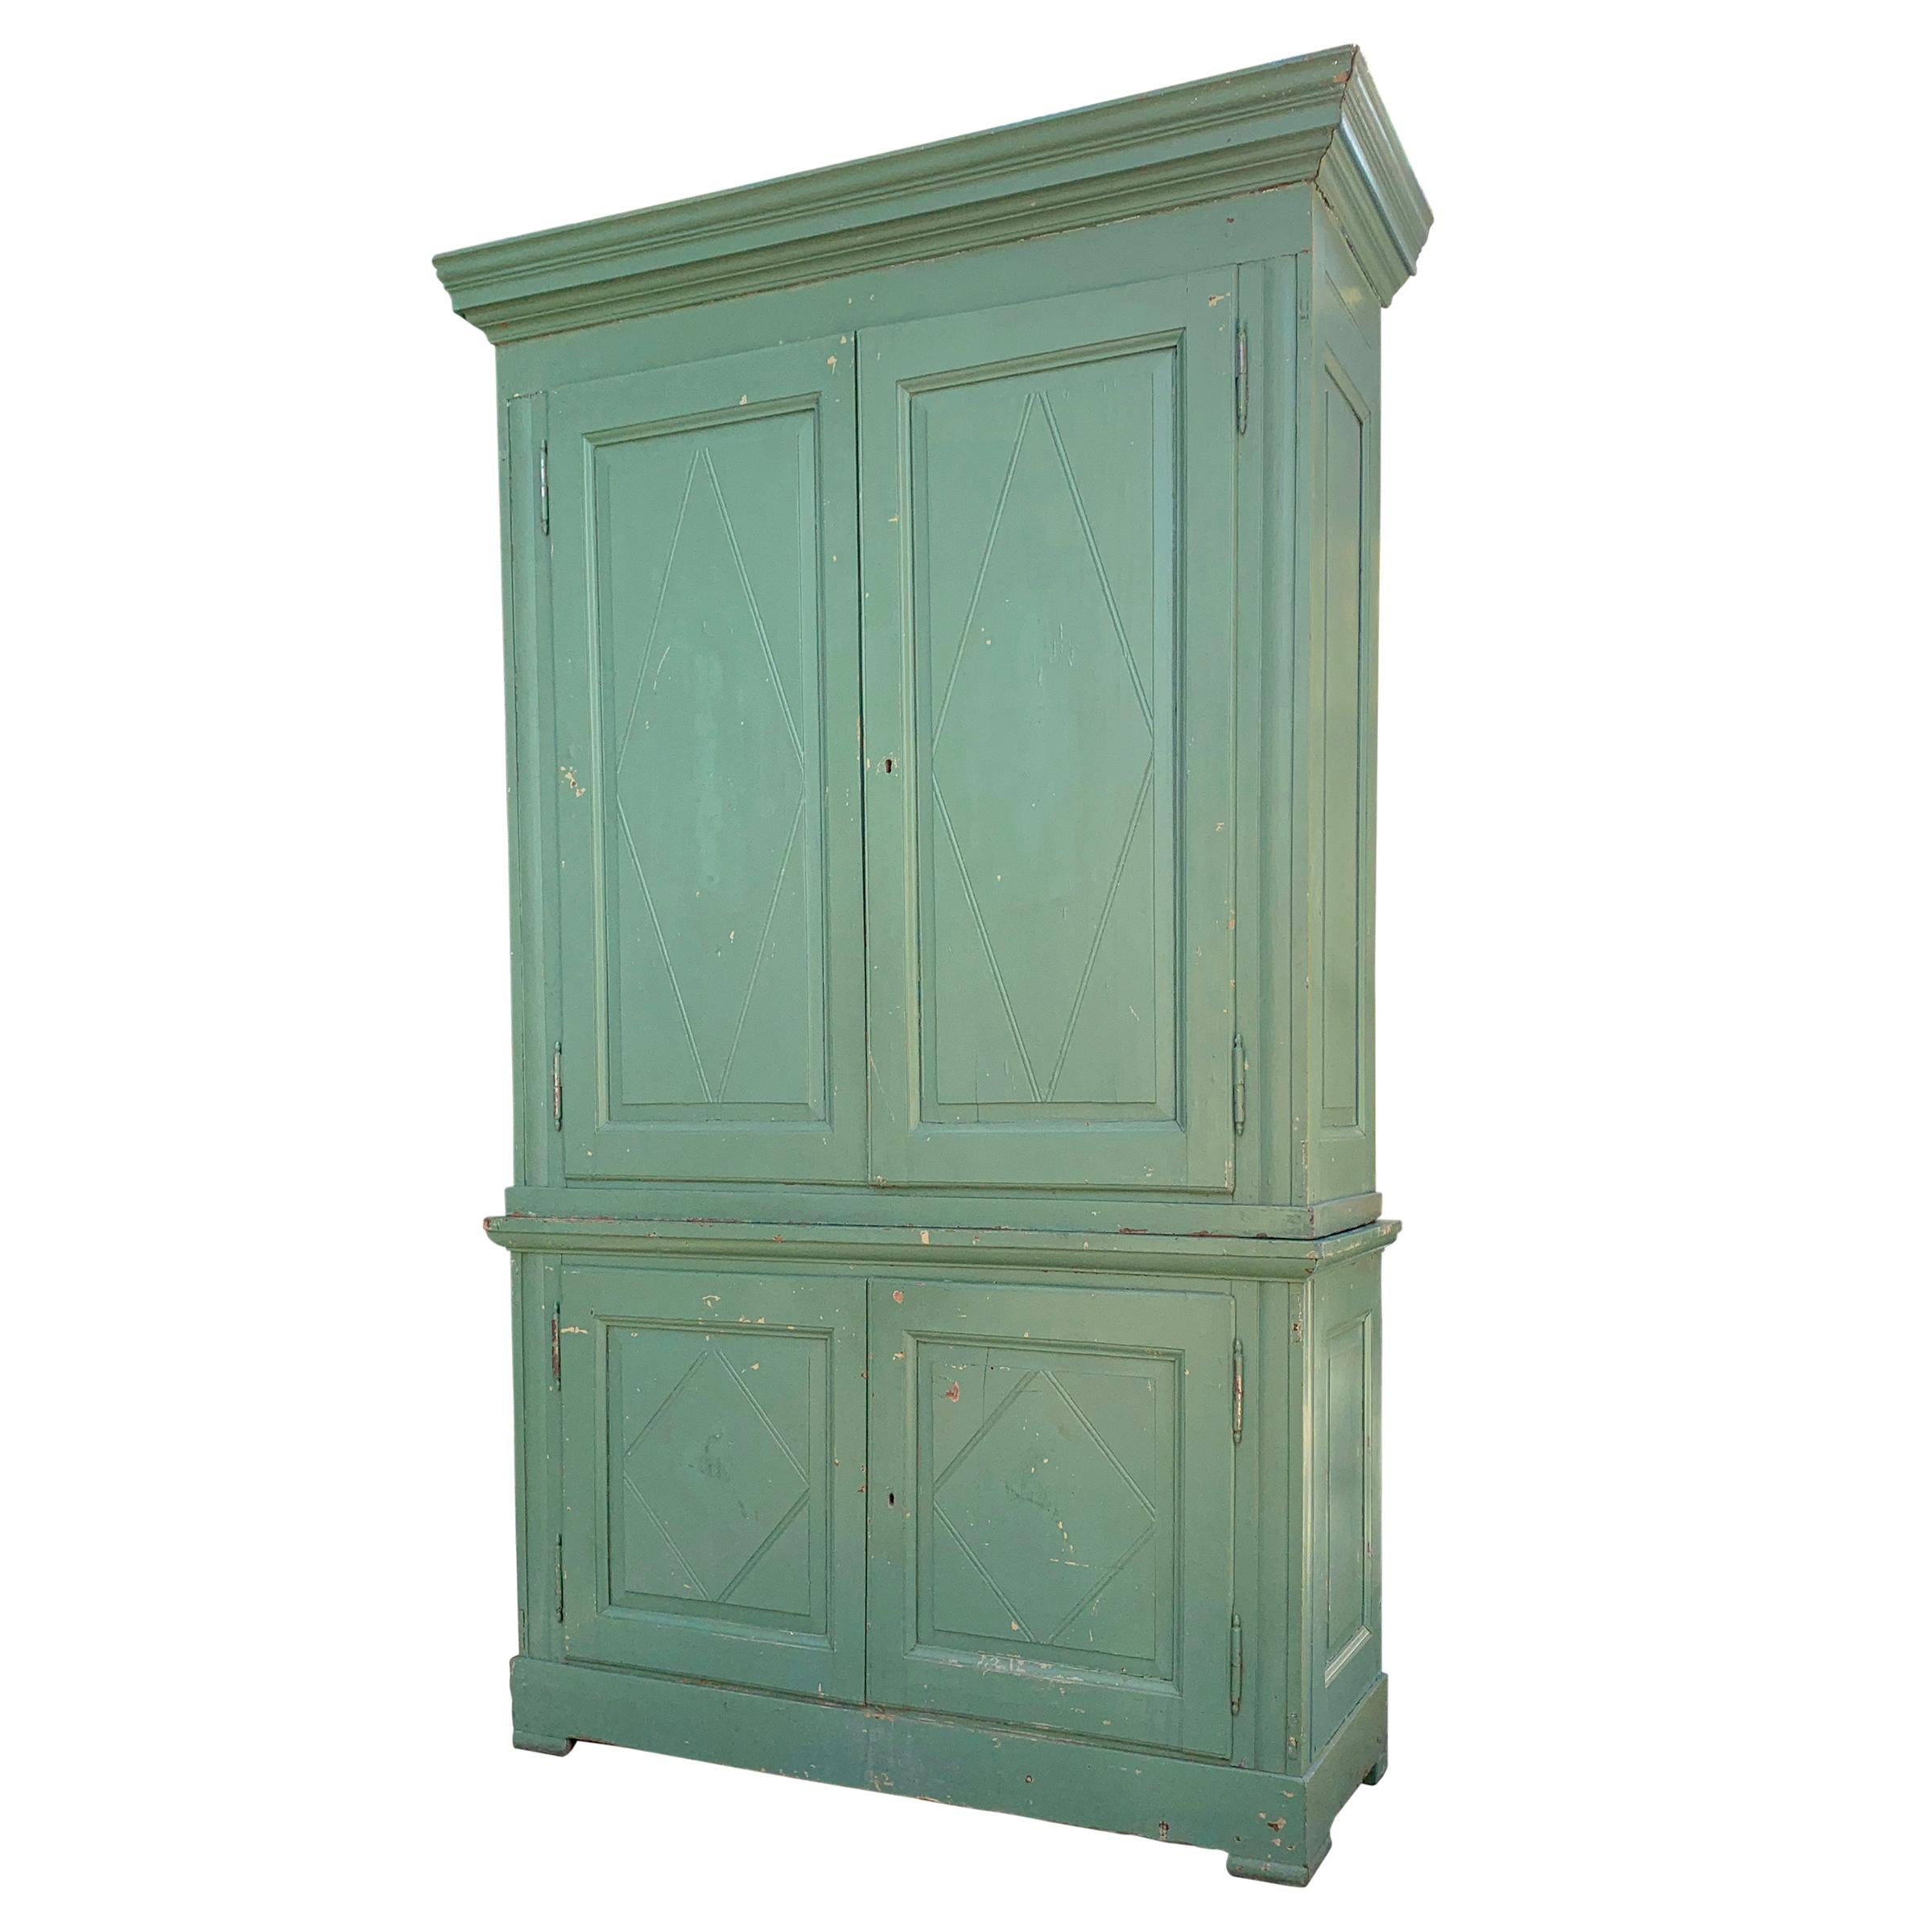 A dazzling monumental 19th century Italian pistachio green painted pine cabinet with two large doors at the top and two smaller doors at the bottom, all with diamond paneling.